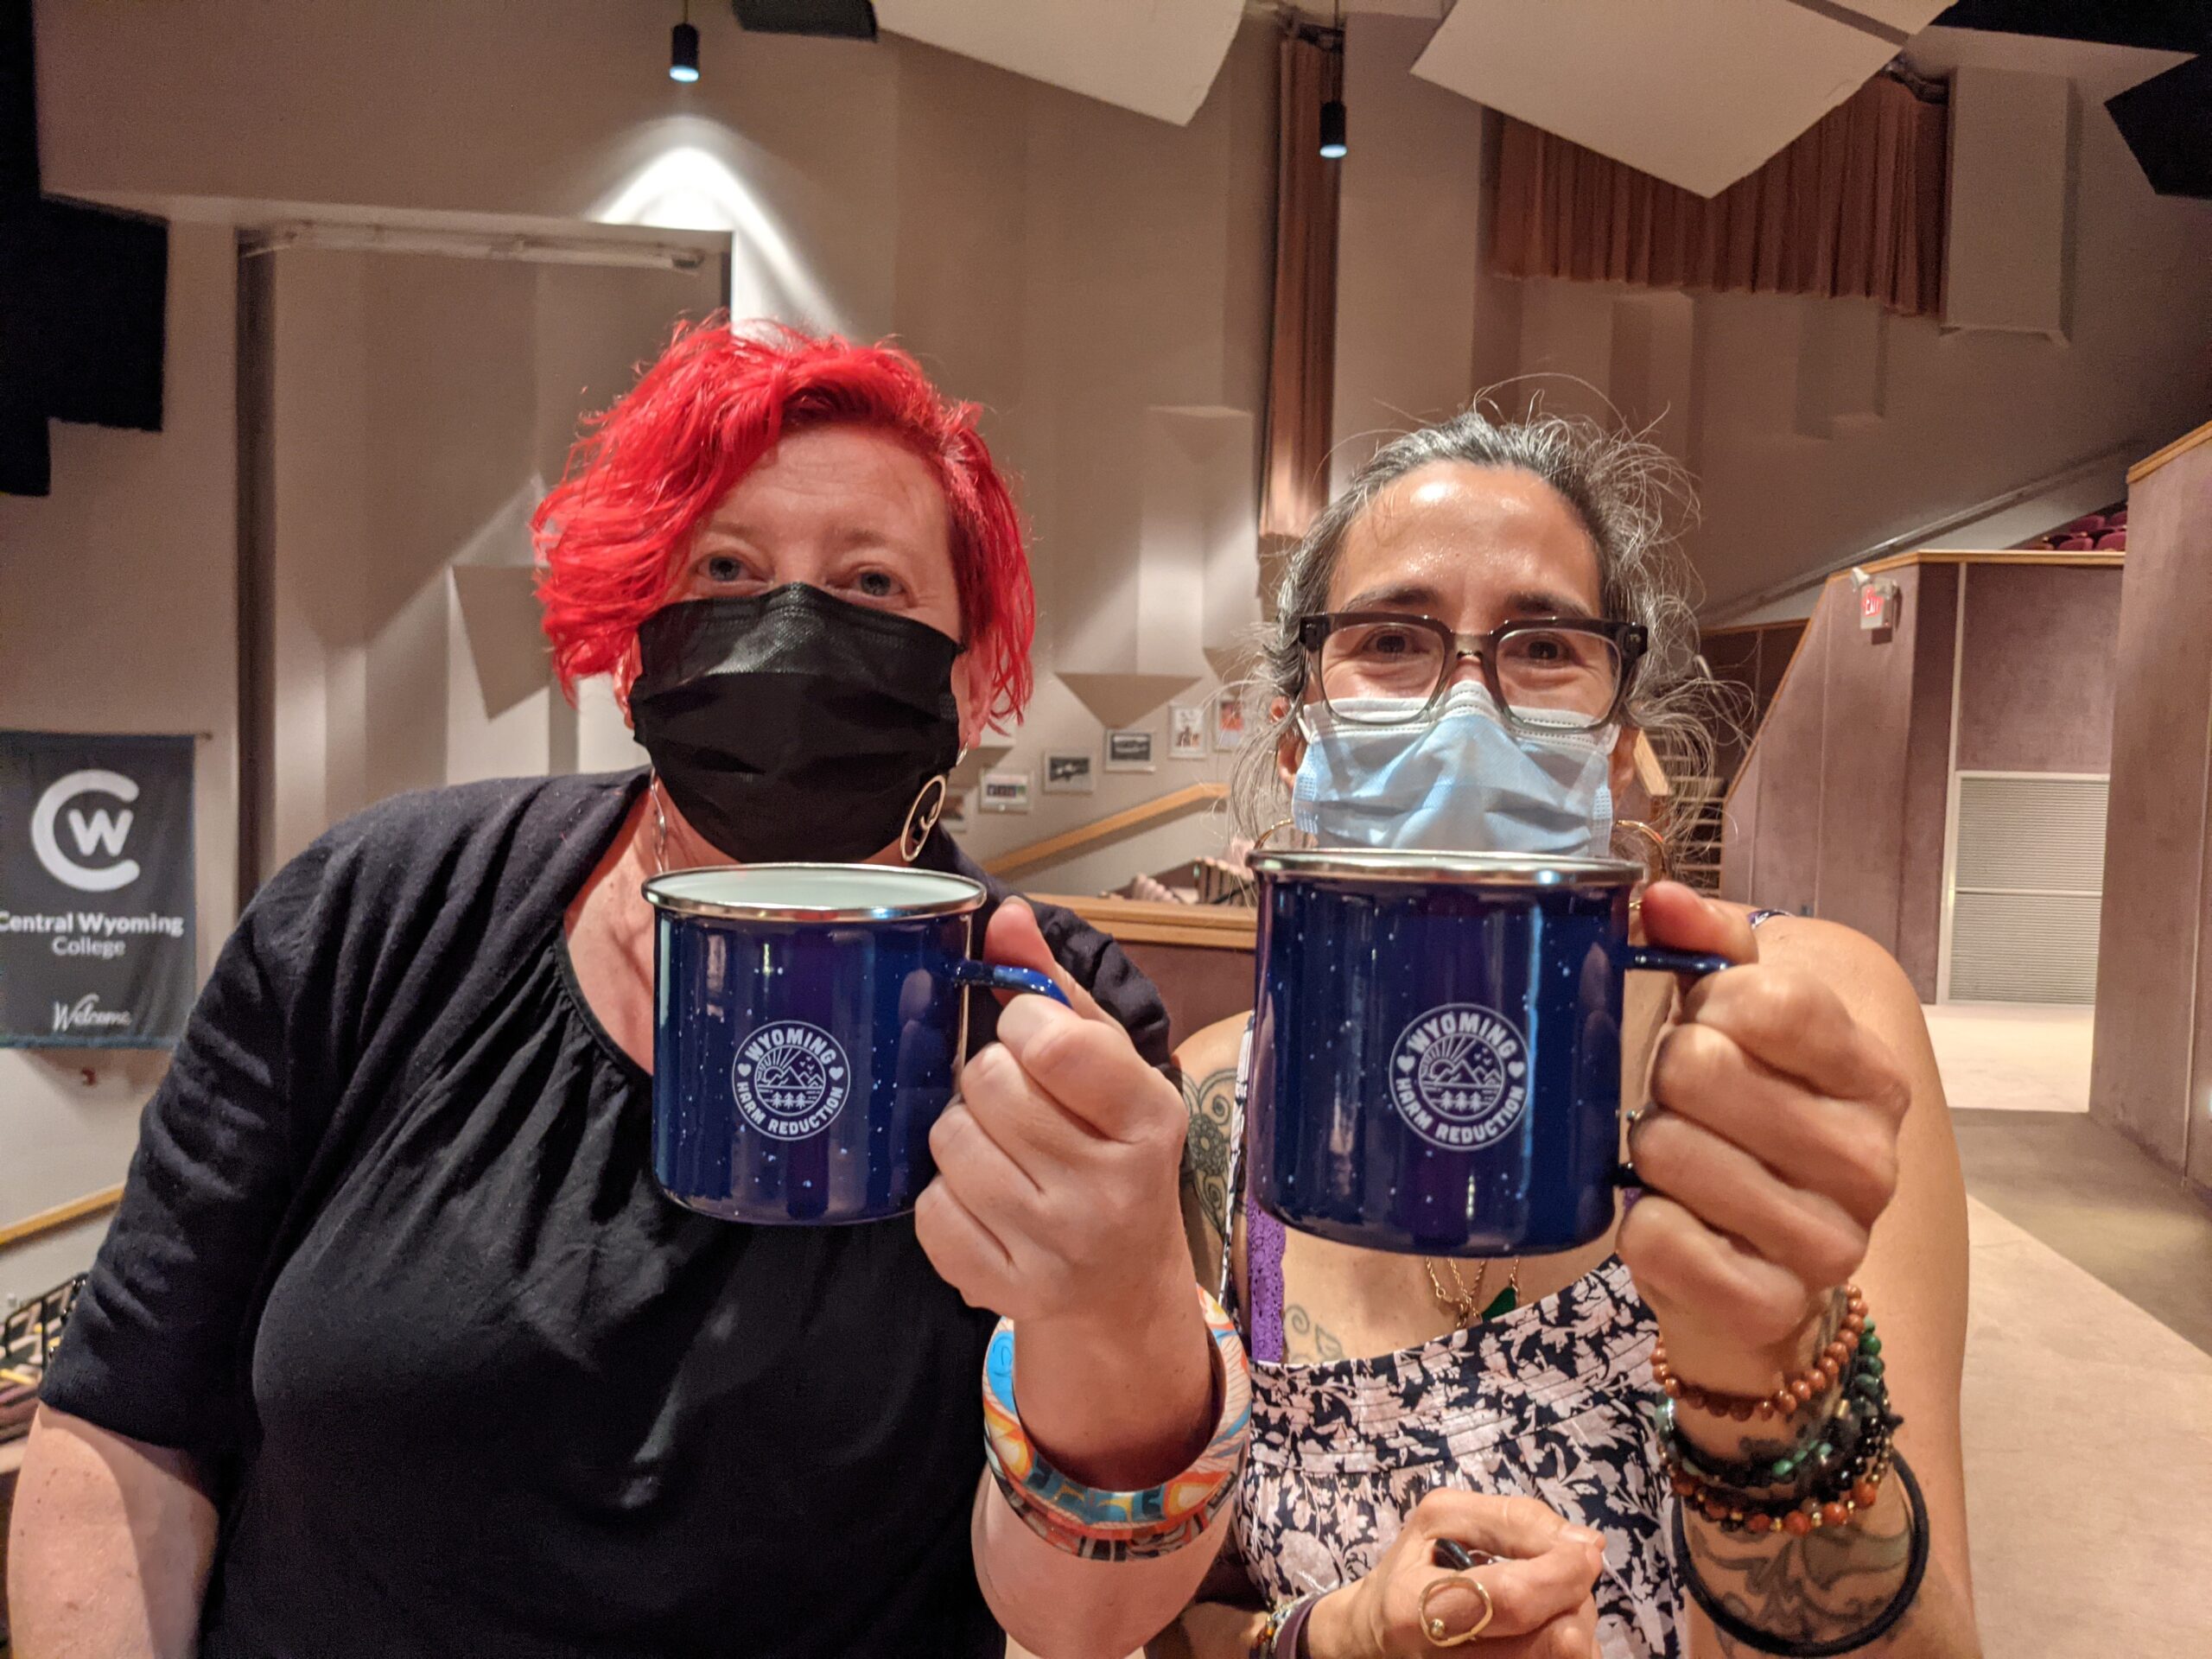 tanagra and emma wearing masks and holding coffee mugs